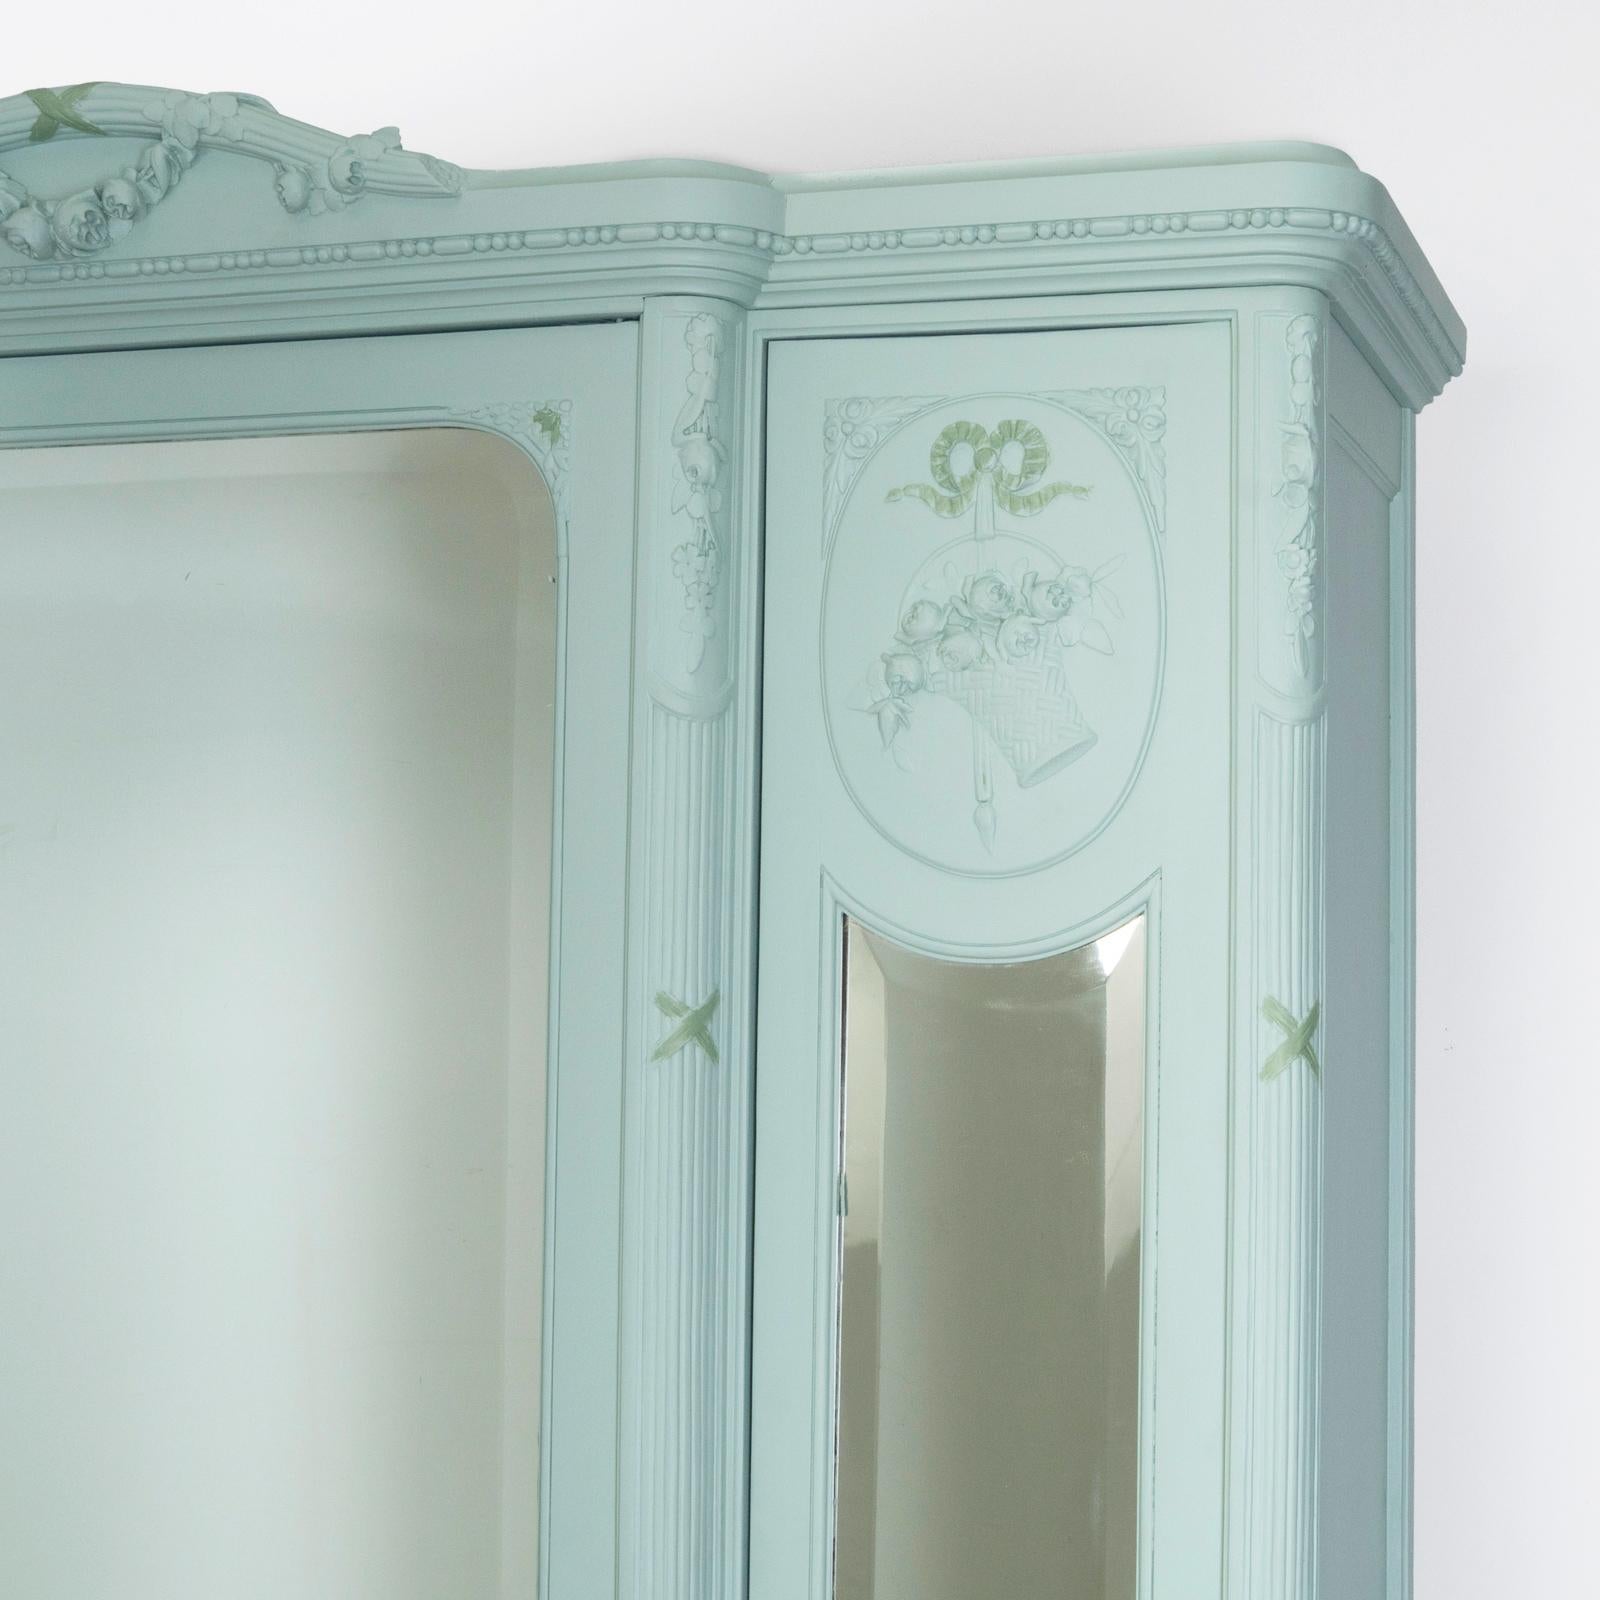 Exquisite 19th Century Louis XVI Style Triple Door Mirror Armoire – a perfect blend of elegance, design, and practicality!

Adorned with decorative oval panels, the side mirror doors exhibit an exceptional touch. The full-length beveled mirrors not